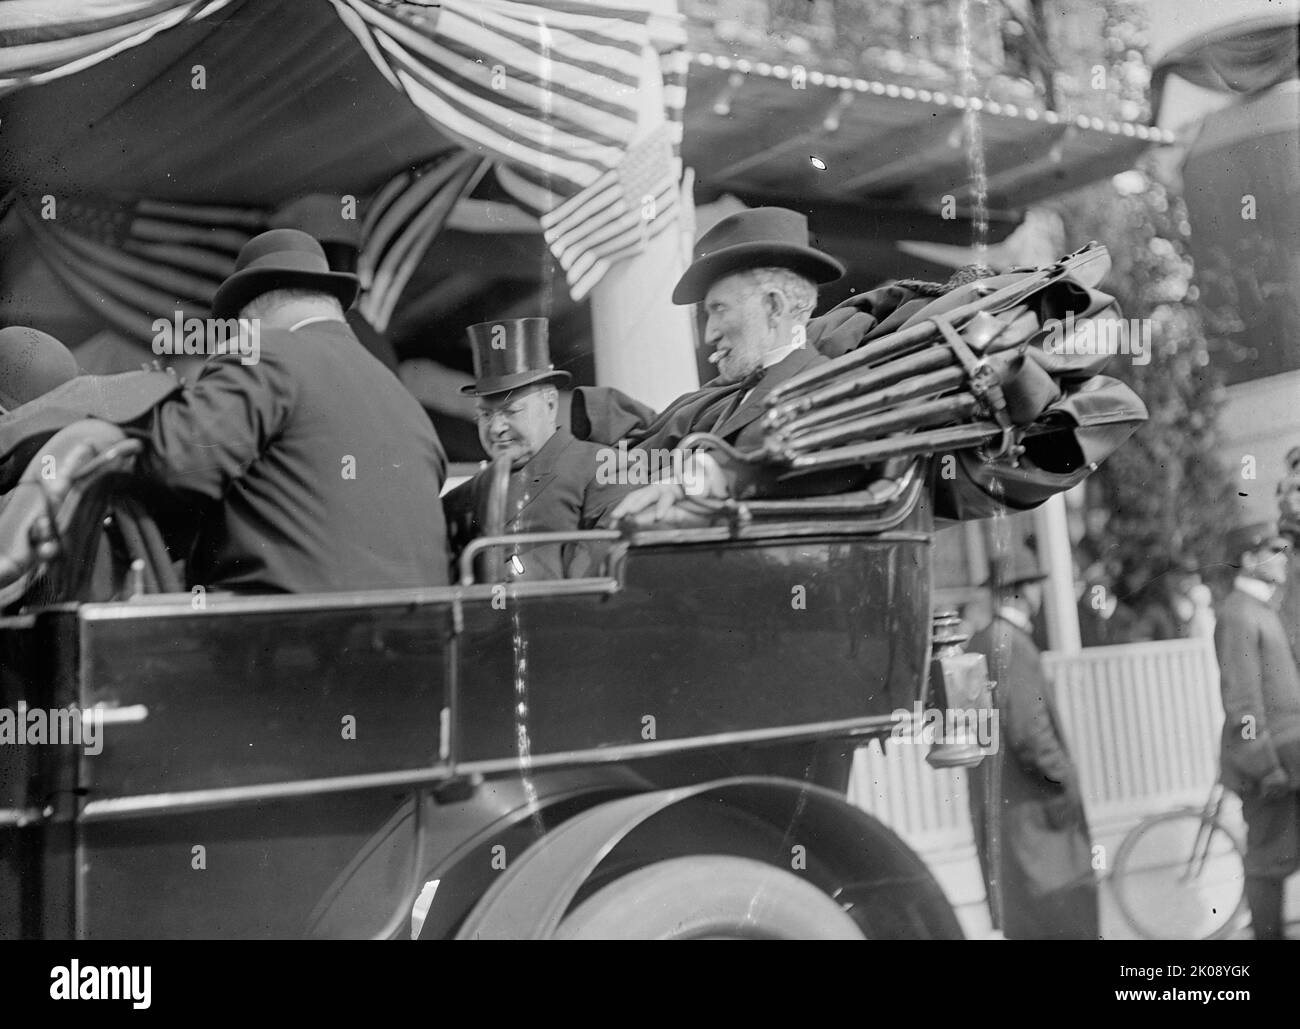 Joseph Gurney Cannon, Rep. from Illinois, Right, with Vice President Sherman, 1911. [US politicians: James S. Sherman, and Joseph Gurney Cannon, Representative 1873-1891, 1893-1913, 1915-1923, Speaker of The House, 1903-1911]. Stock Photo